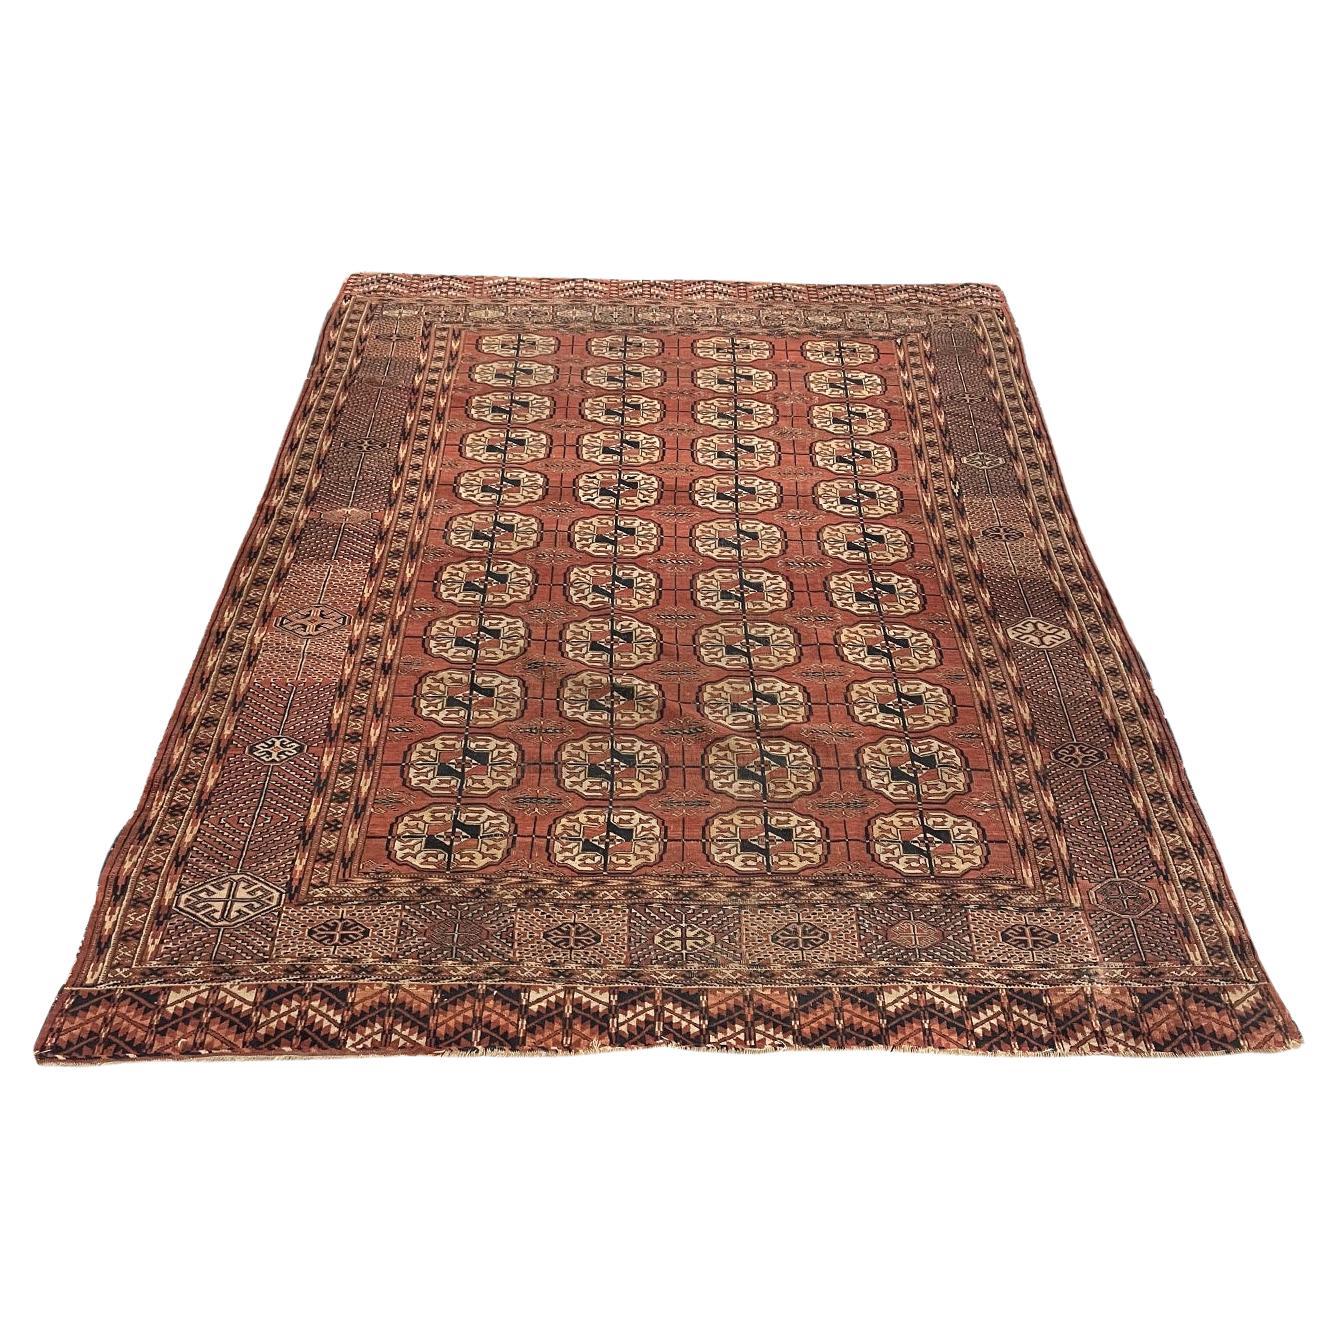 What are Bokhara rugs made out of?